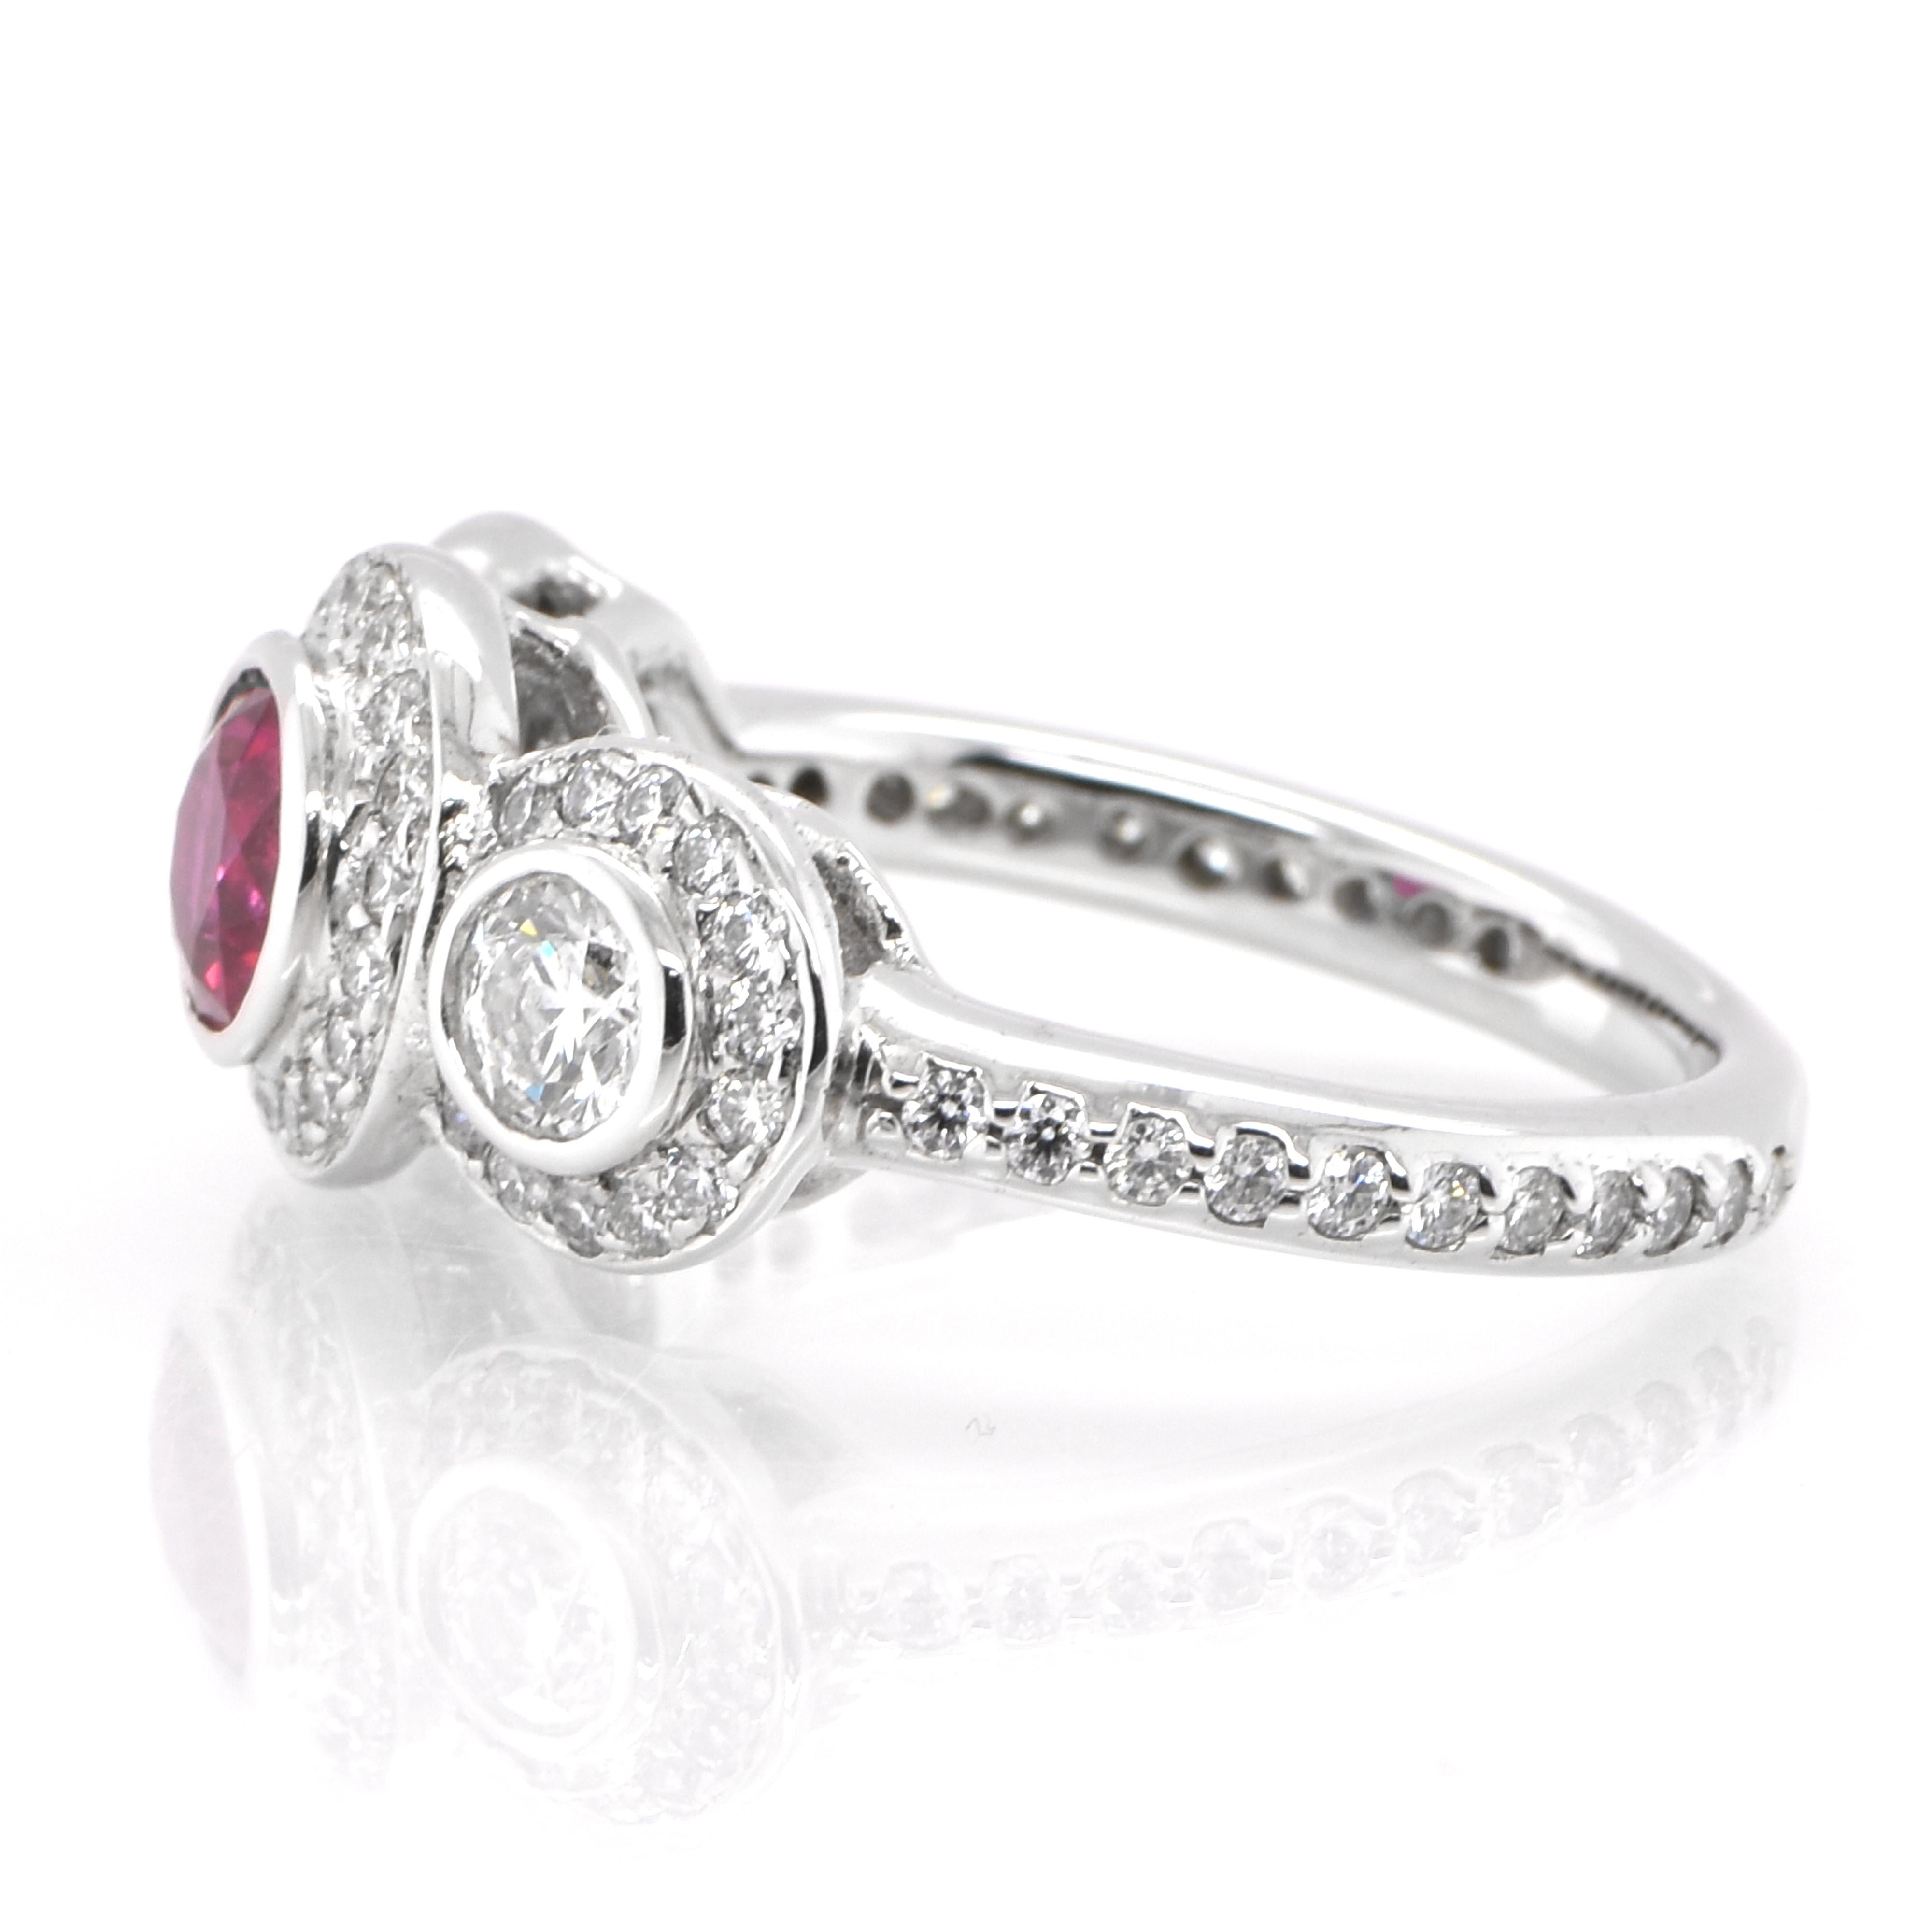 Round Cut GIA Certified 0.67 Carat Burmese Ruby and Diamond Ring Set in 18k Gold For Sale